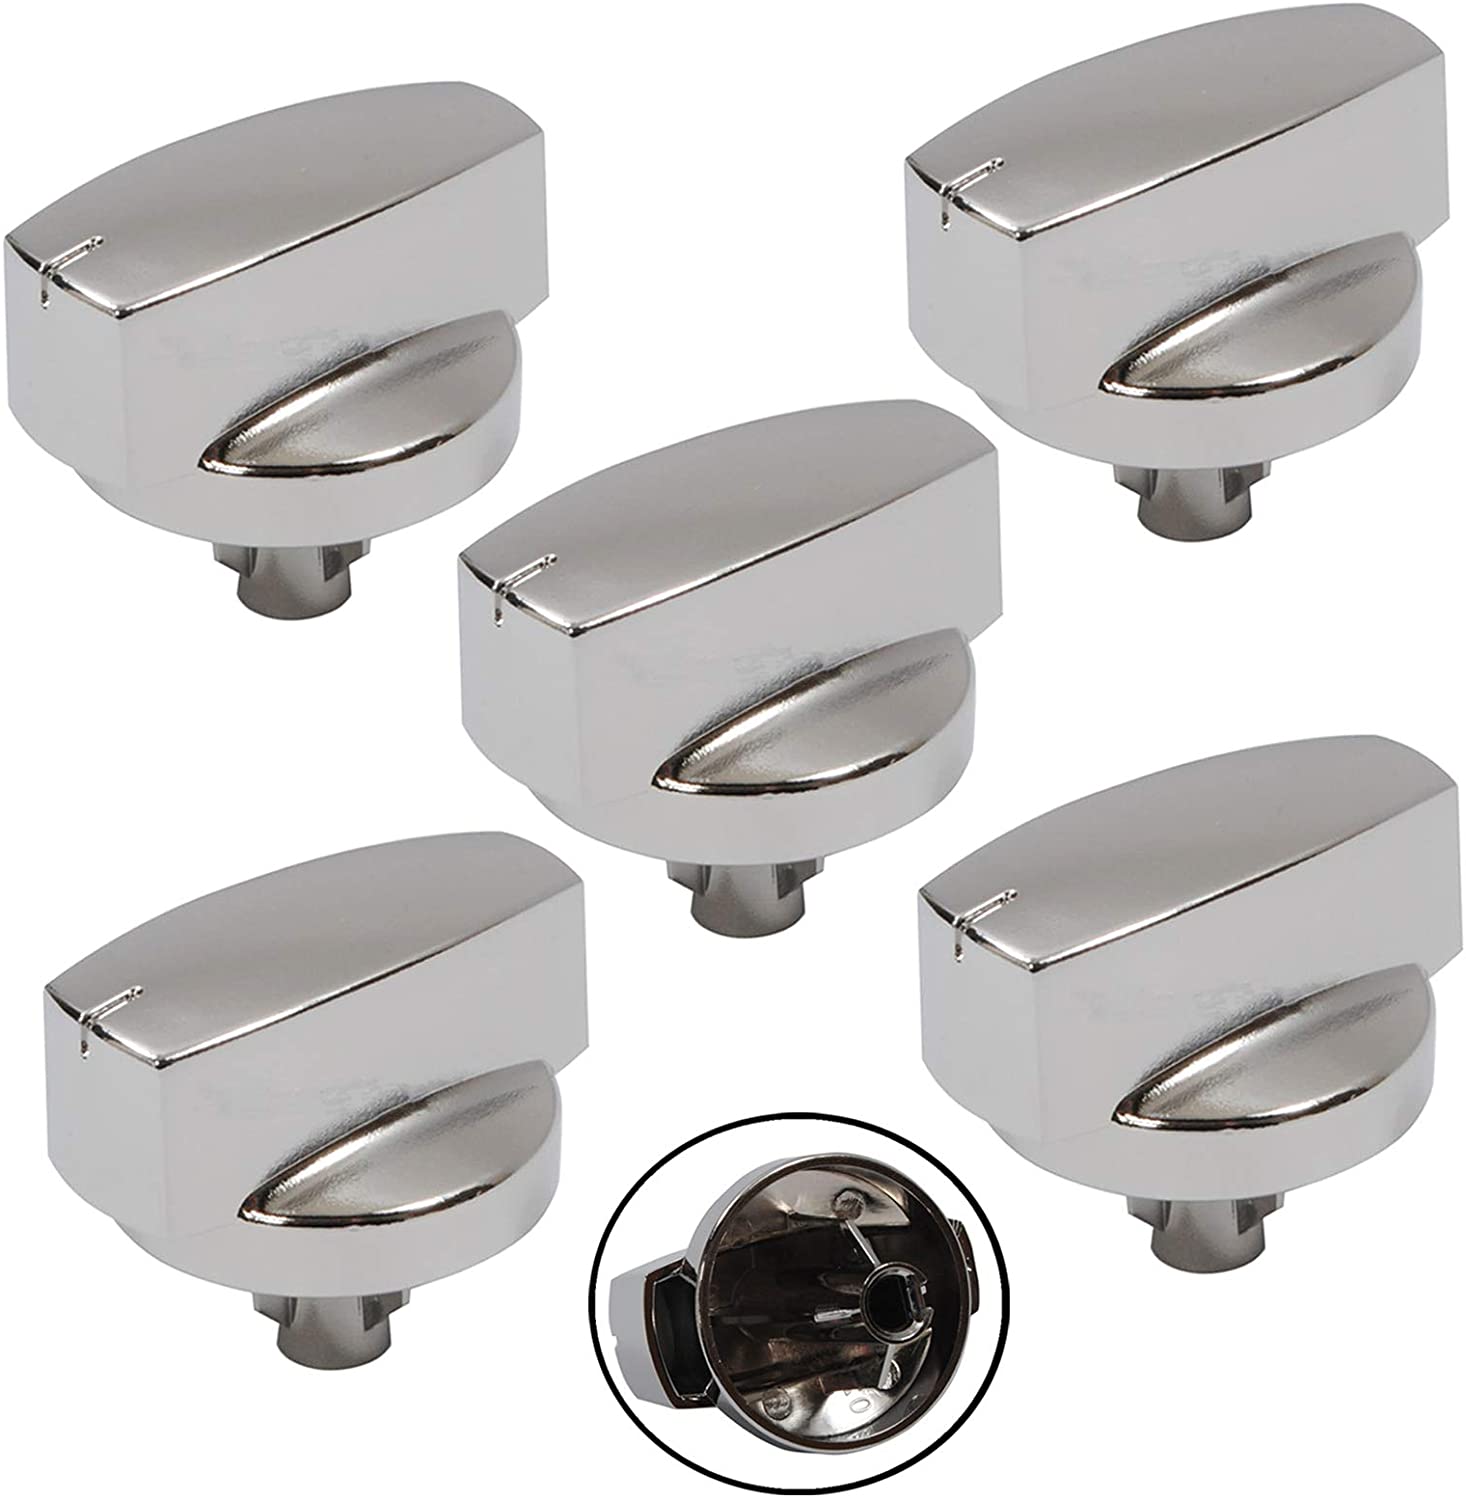 STOVES Oven Cooker Knob Function Control Switch 444445412 (Silver/Chrome) Pack of 5